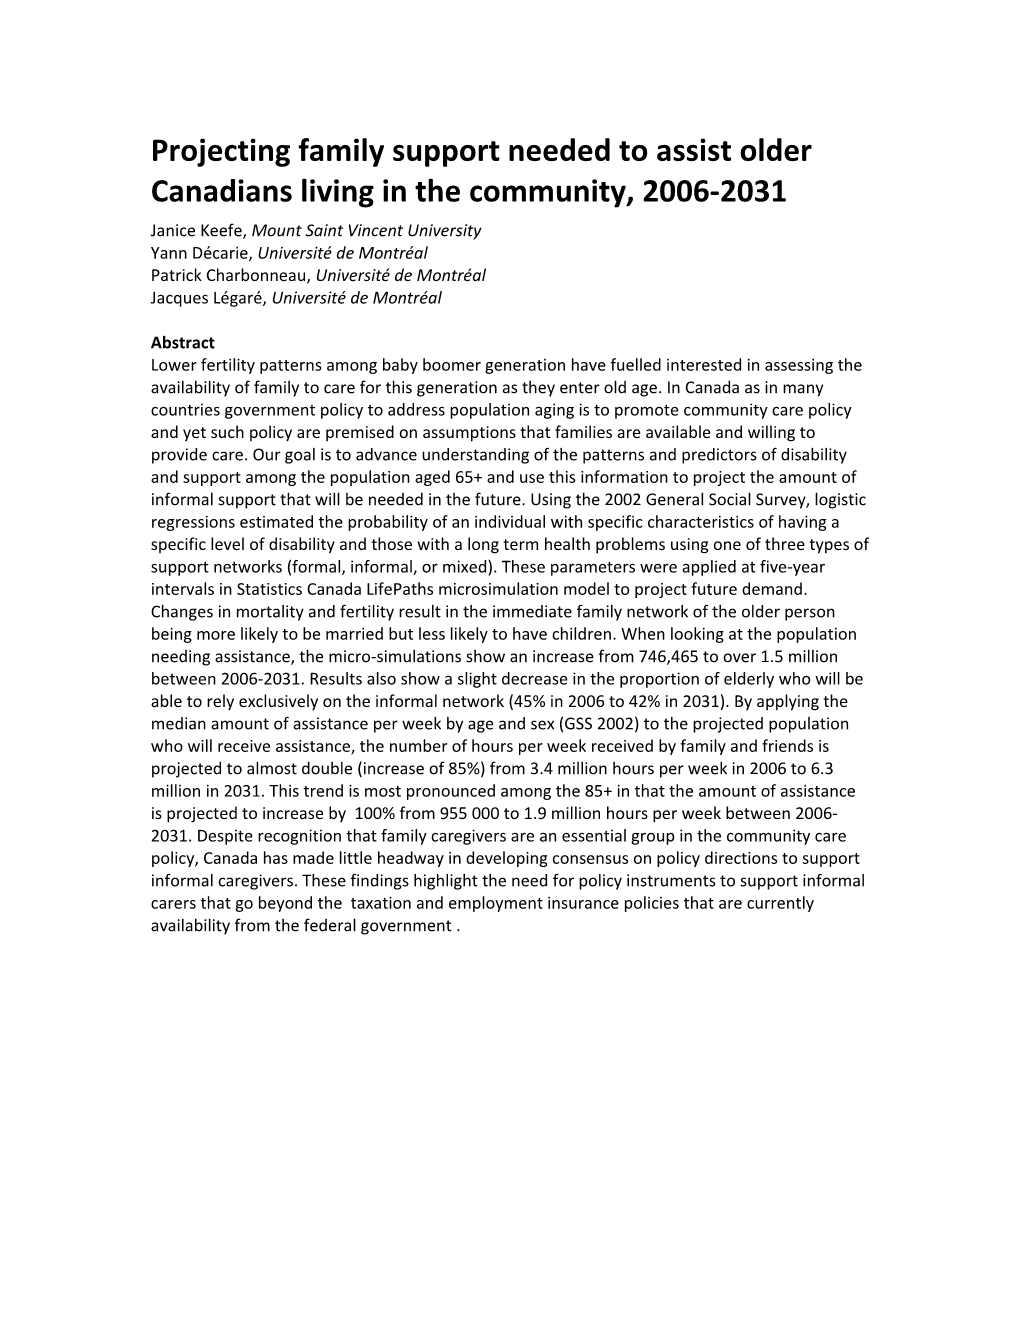 Projecting Family Support Needed to Assist Older Canadians Living in the Community, 2006-2031